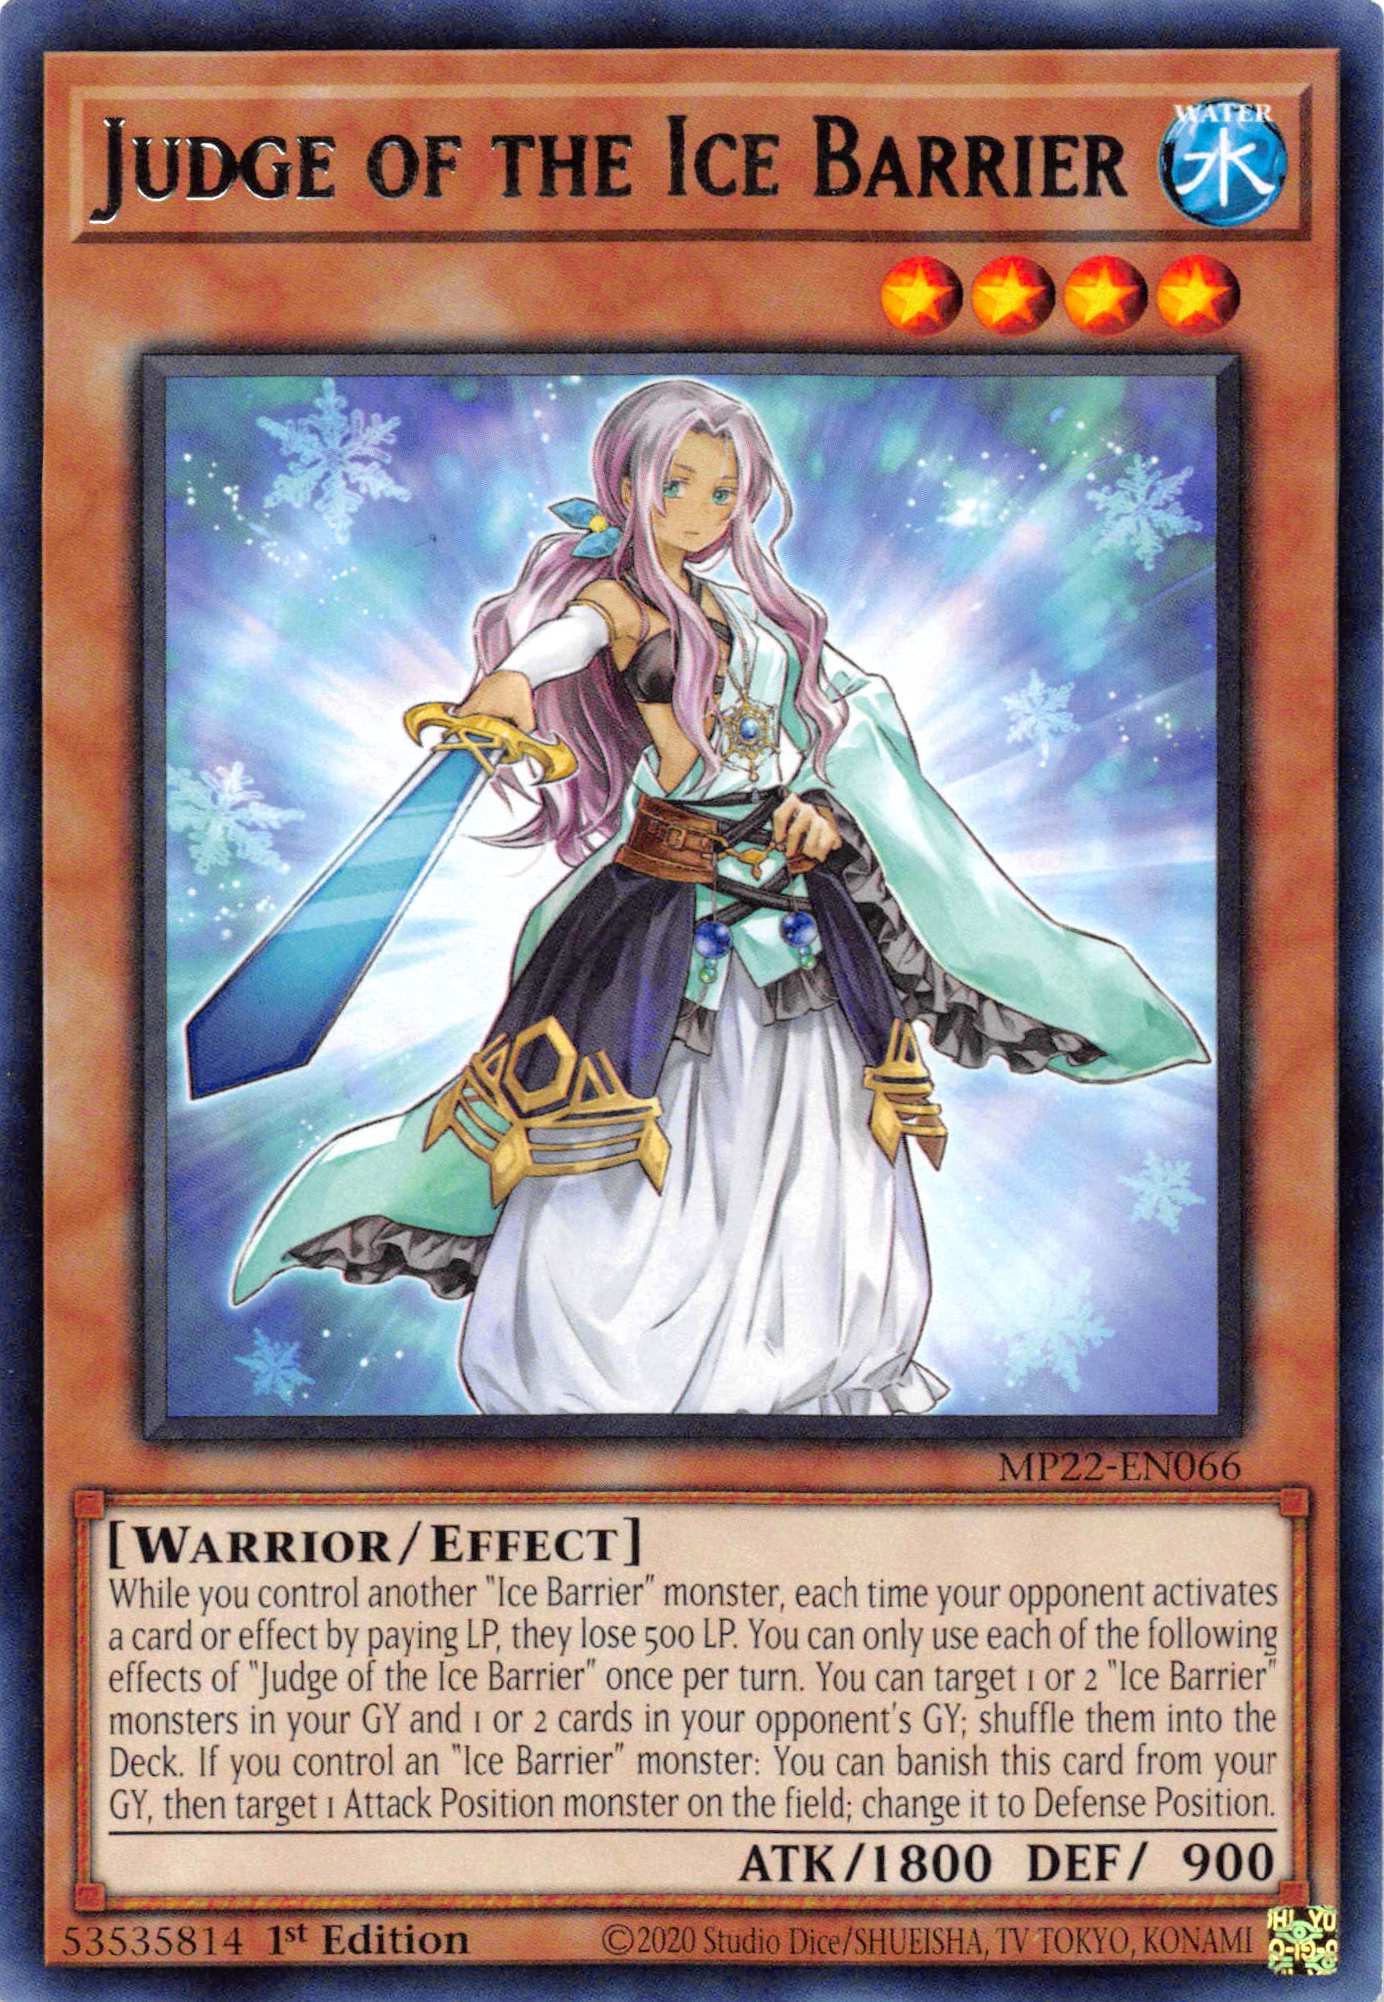 Judge of the Ice Barrier [MP22-EN066] Common